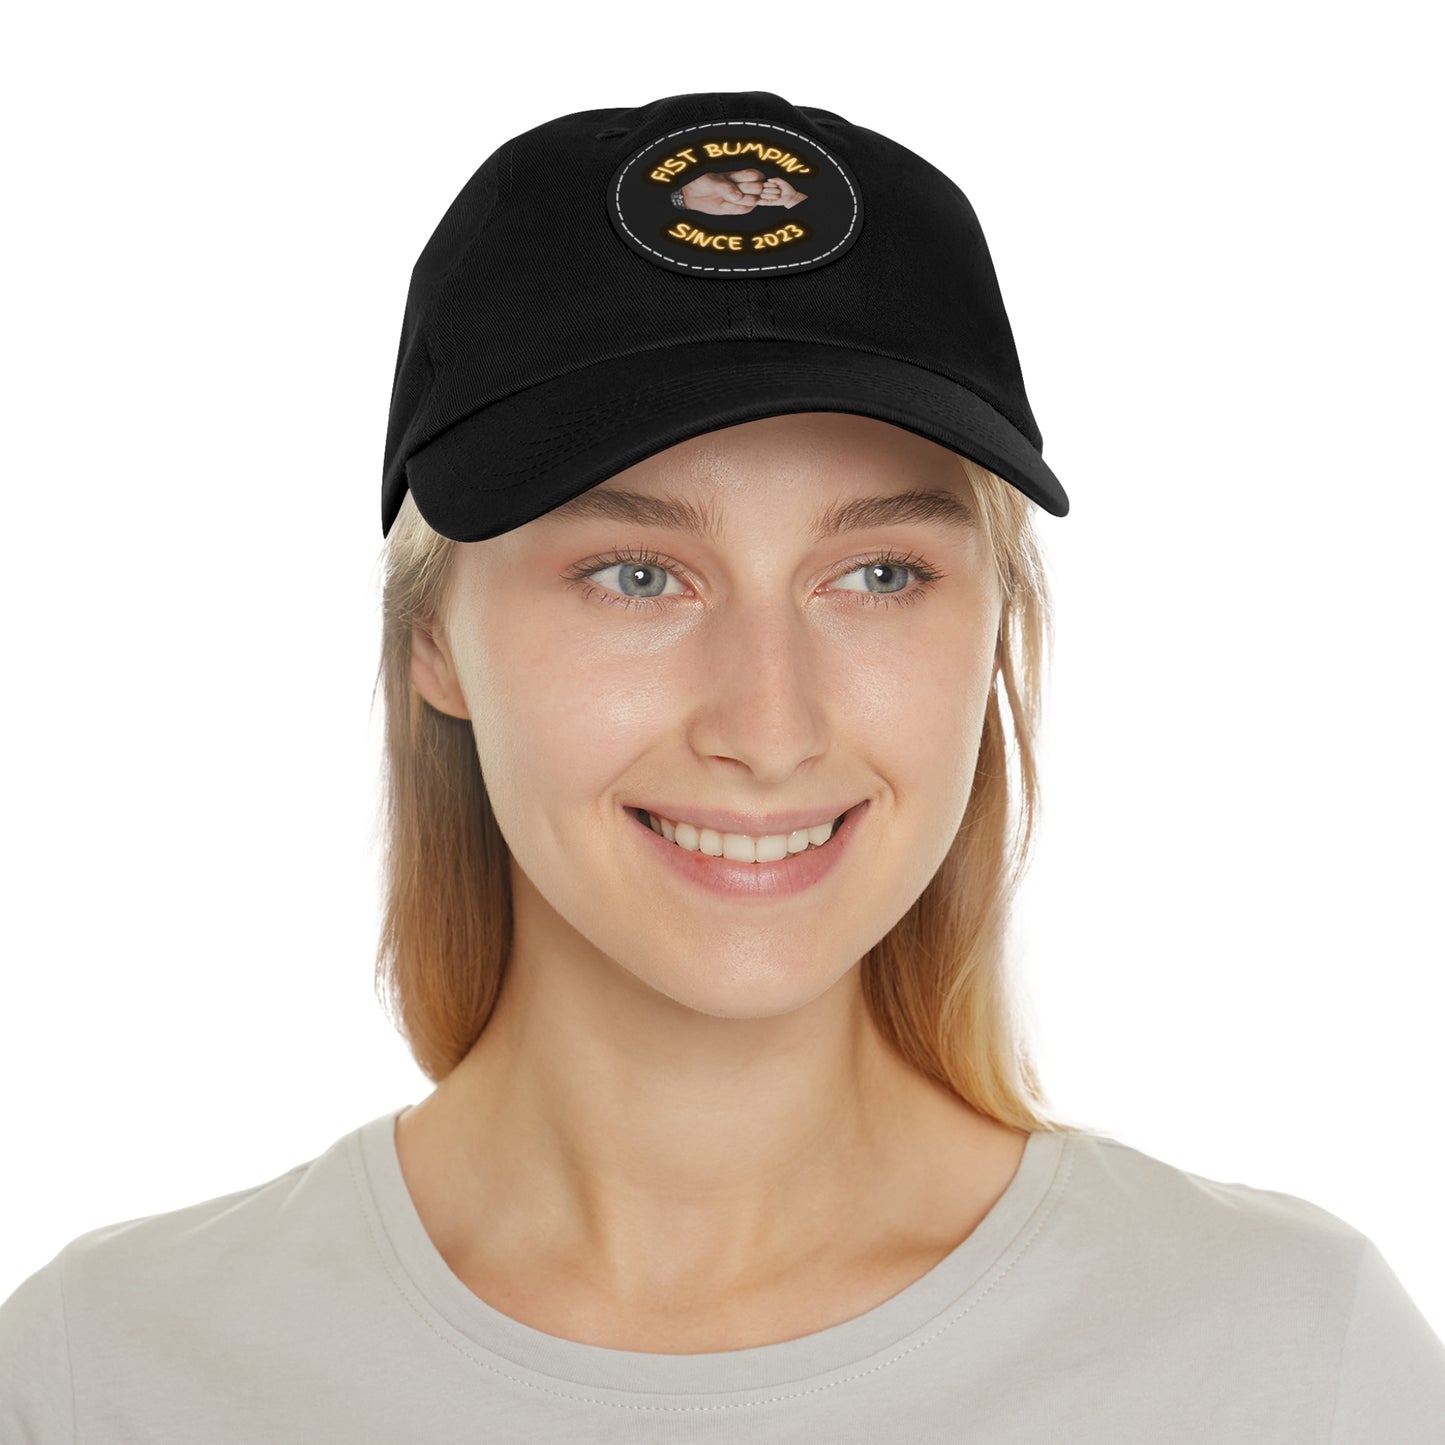 Fist Bumpin’ Since 2023 KC Gold Lettering Dad Hat with Leather Patch (Round)